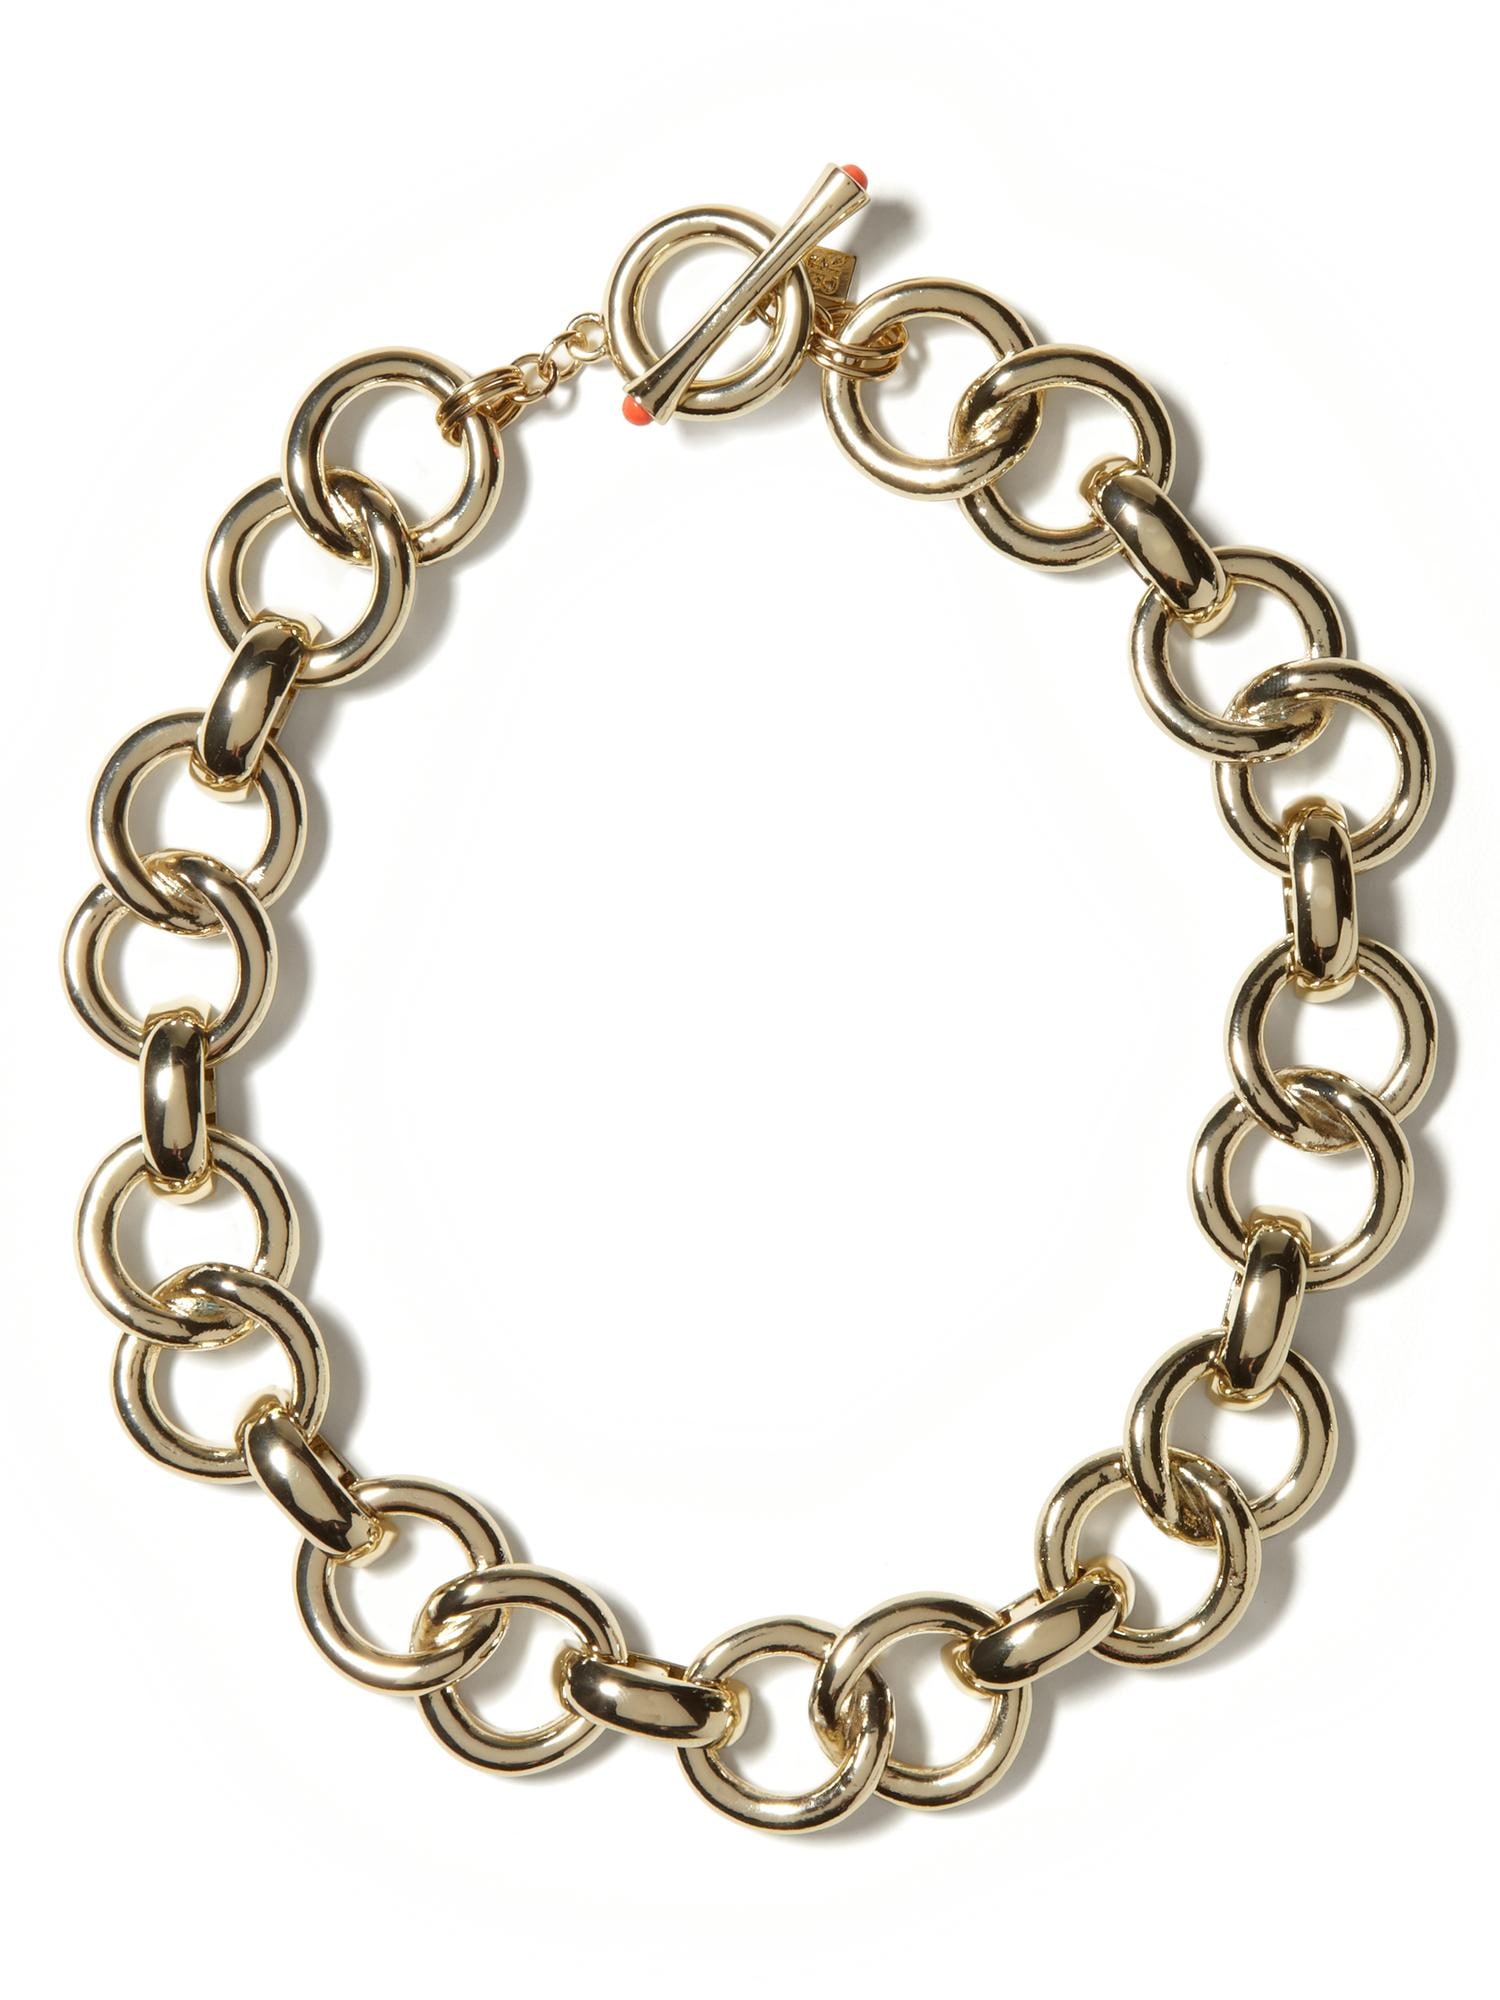 Chic focal chain necklace